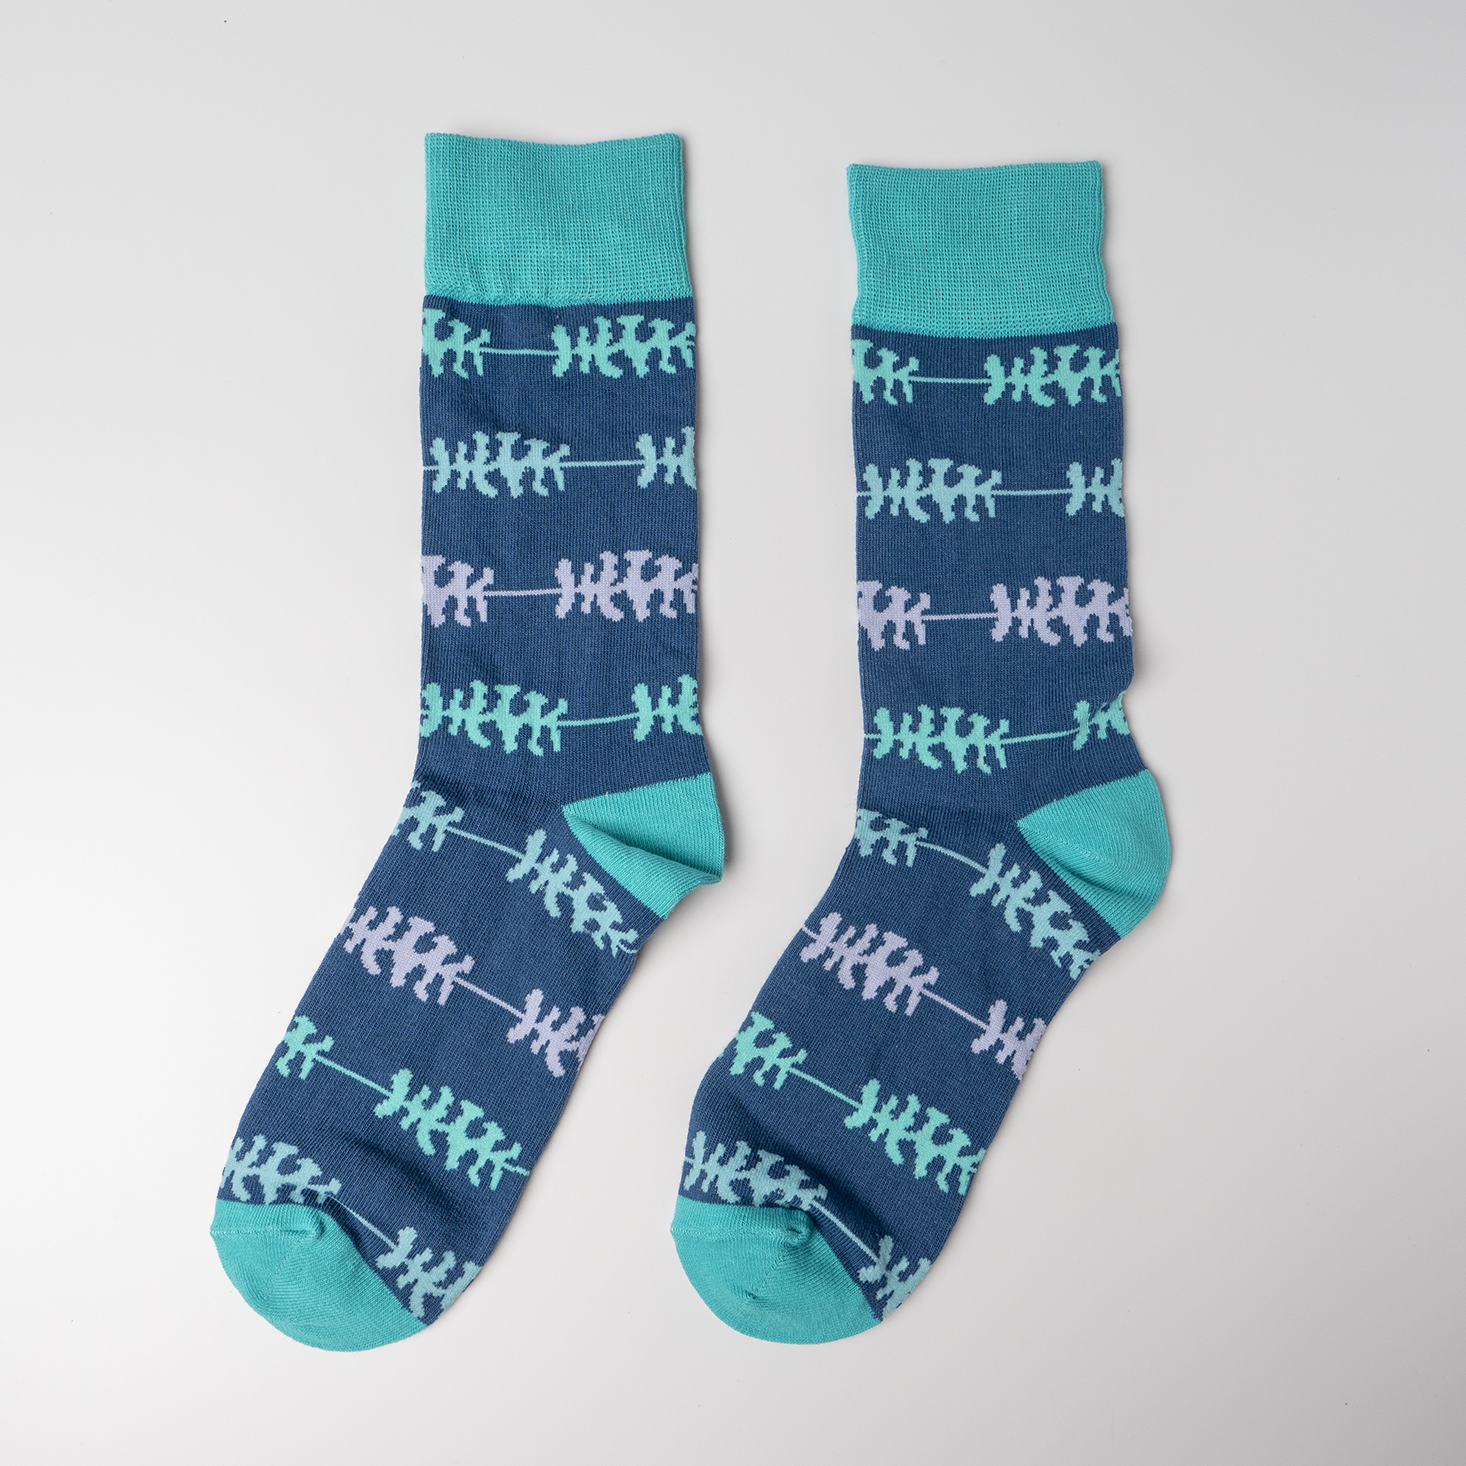 Society Socks Review + 50% Off Coupon - March 2020 | MSA